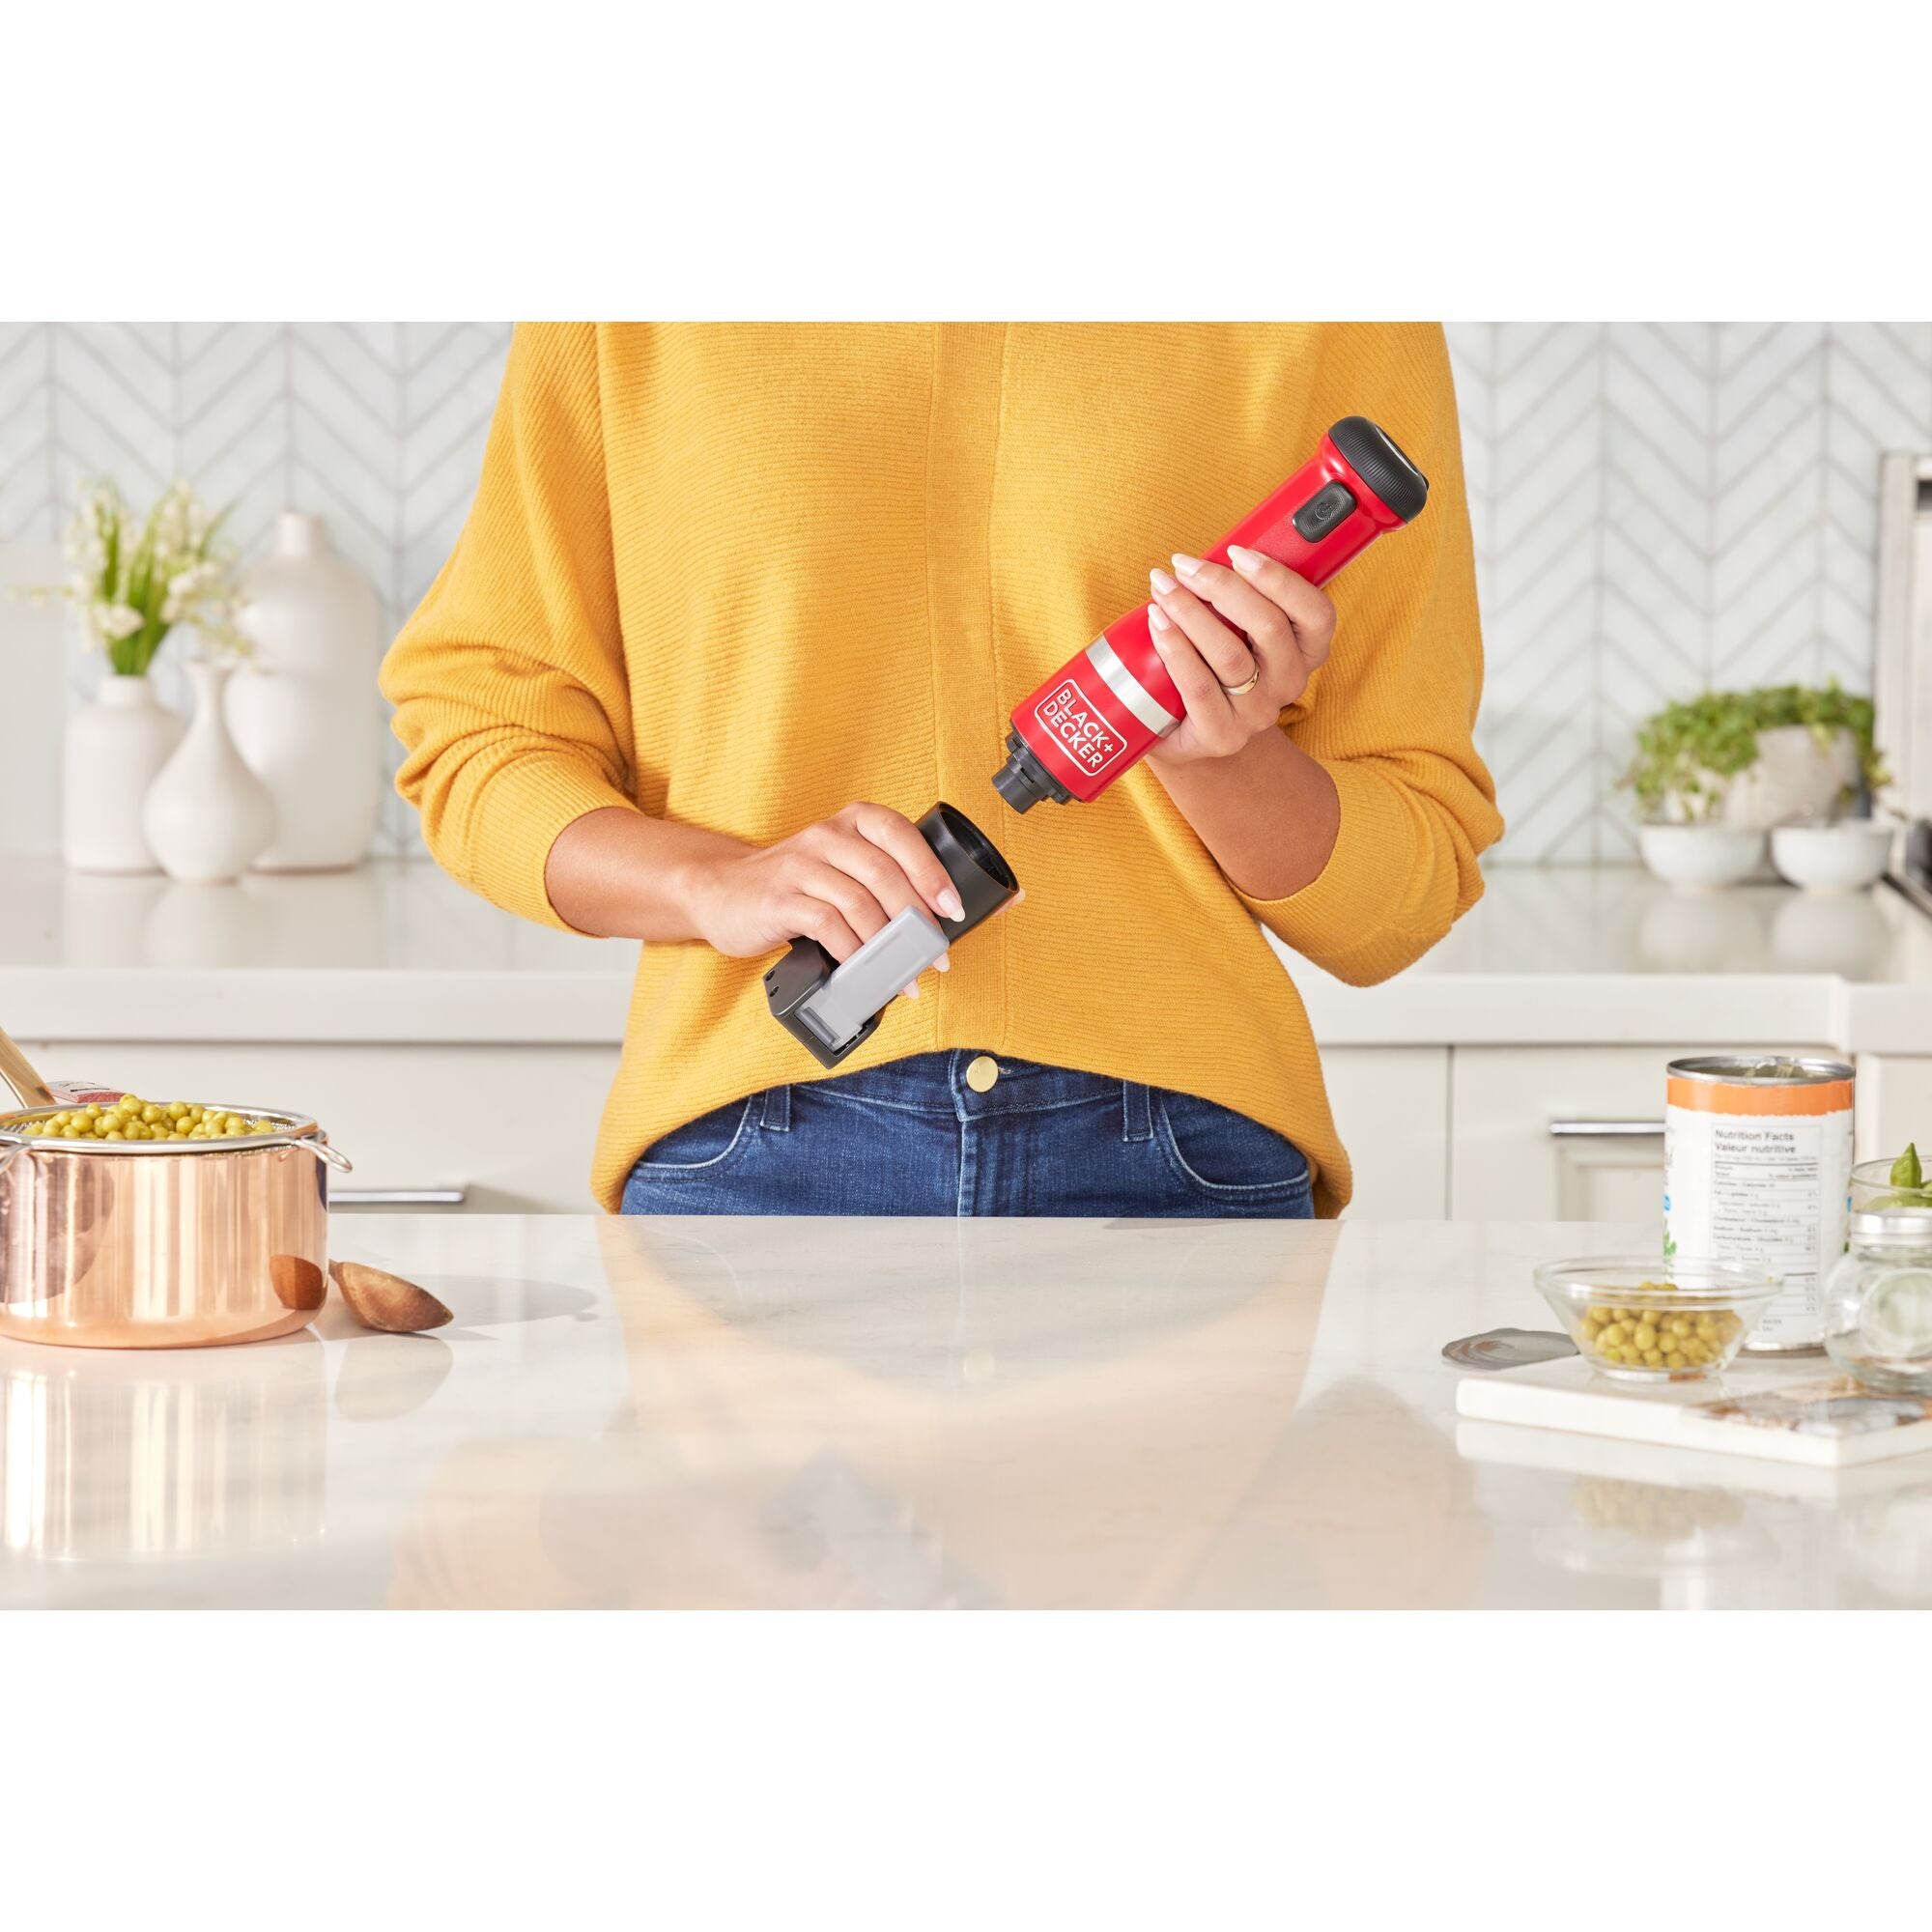 Black & Decker Bckm1016ks06 Kitchen Wand Variable Speed Lithium-Ion 6-in-1 Cordless Red Kitchen Multi-Tool Kit